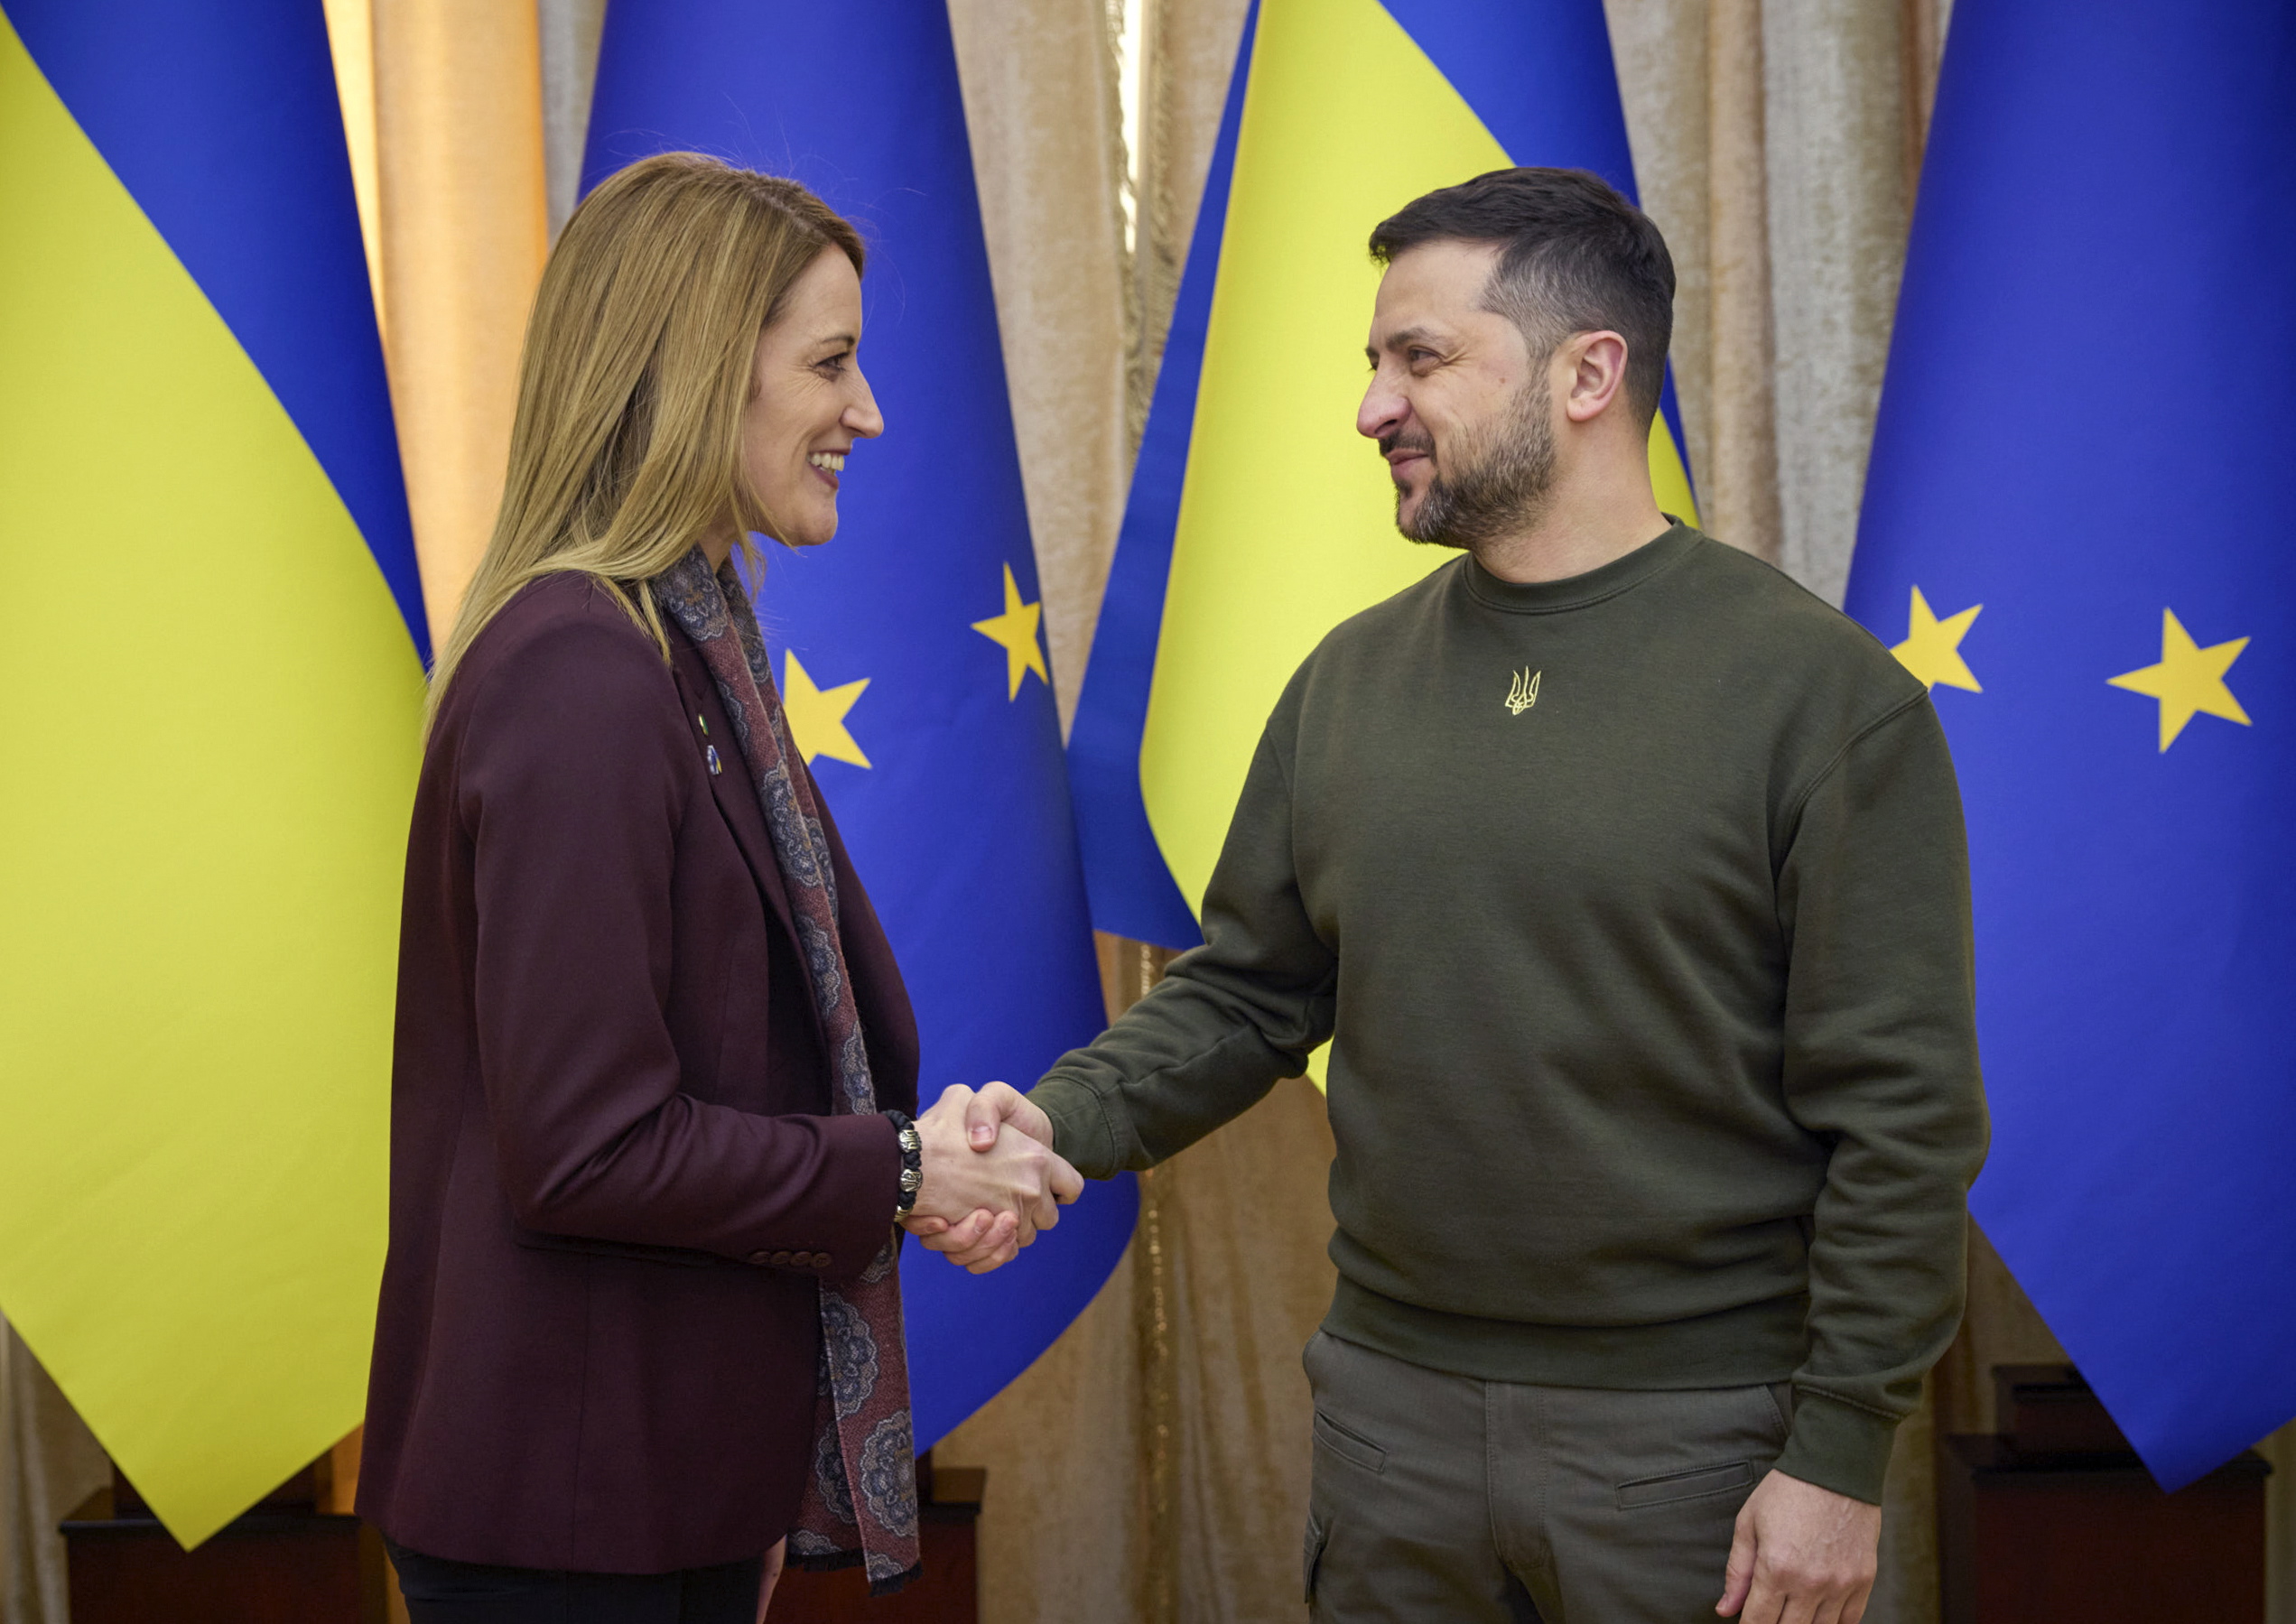 epa10502526 A handout photo made available by the Ukrainian Presidential Press Service shows Ukraine's President Volodymyr Zelensky (R) and Roberta Metsola (L), the President of the European Parliament, pose for a handshake prior their meeting in Lviv, Ukraine, 04 March 2023. Metsola arrived in Ukraine to meet with top officials and express their support for Ukraine amid the Russian invasion.  EPA/UKRAINE PRESIDENTIAL PRESS SERVICE HANDOUT  HANDOUT EDITORIAL USE ONLY/NO SALES